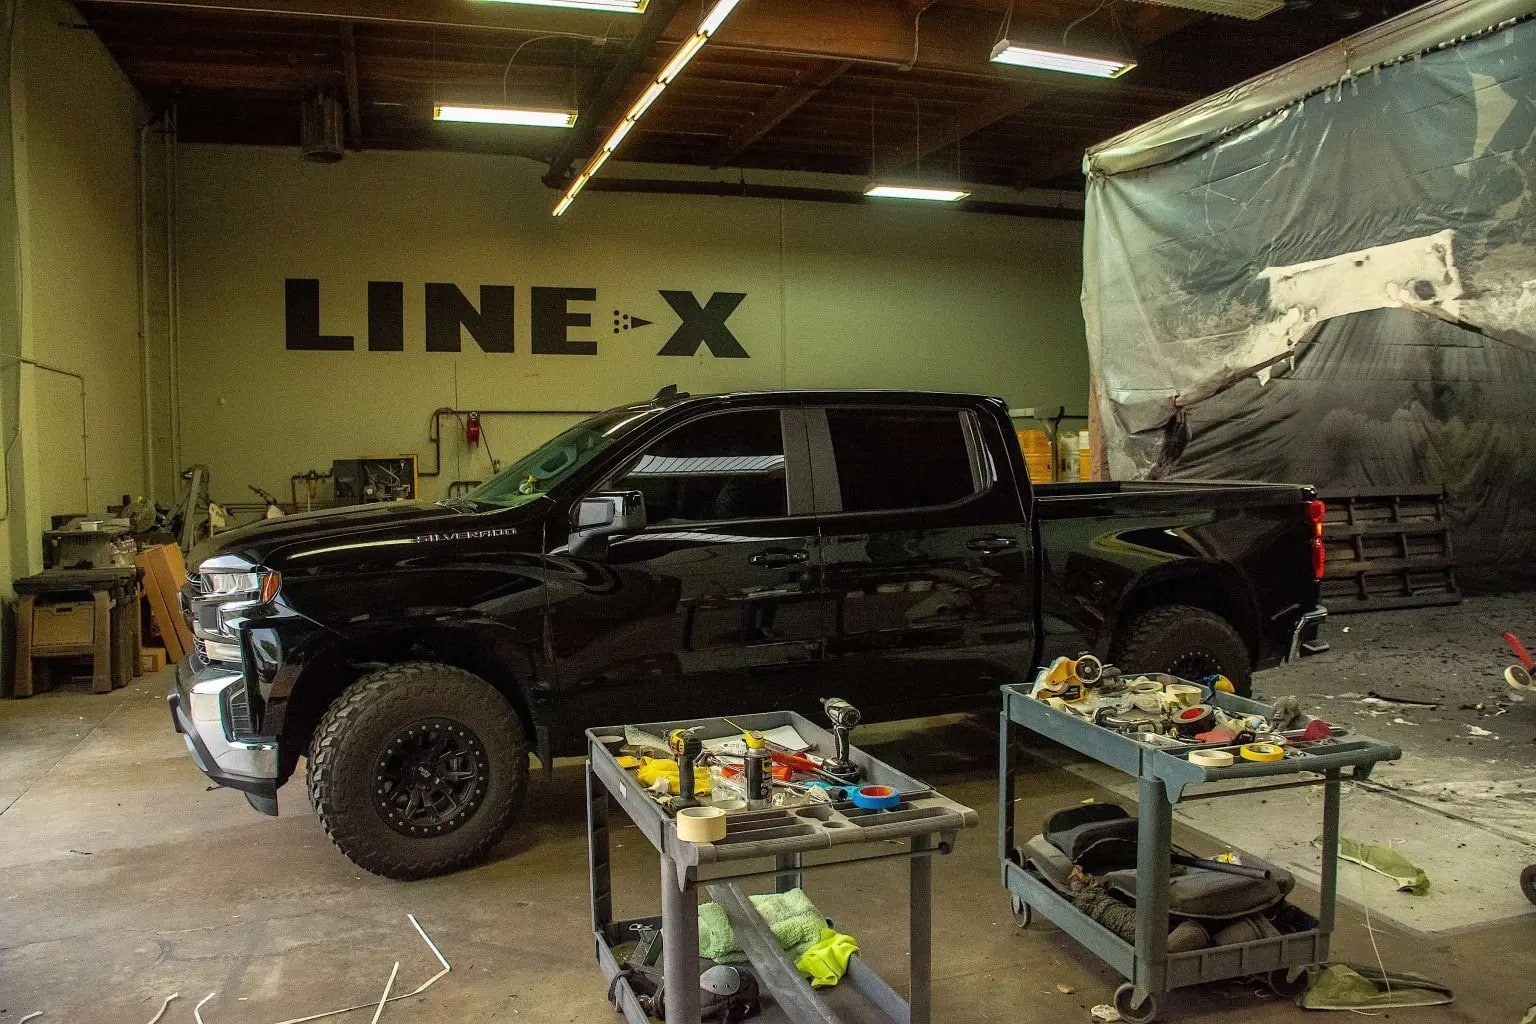 A black Chevrolet truck in a workshop.